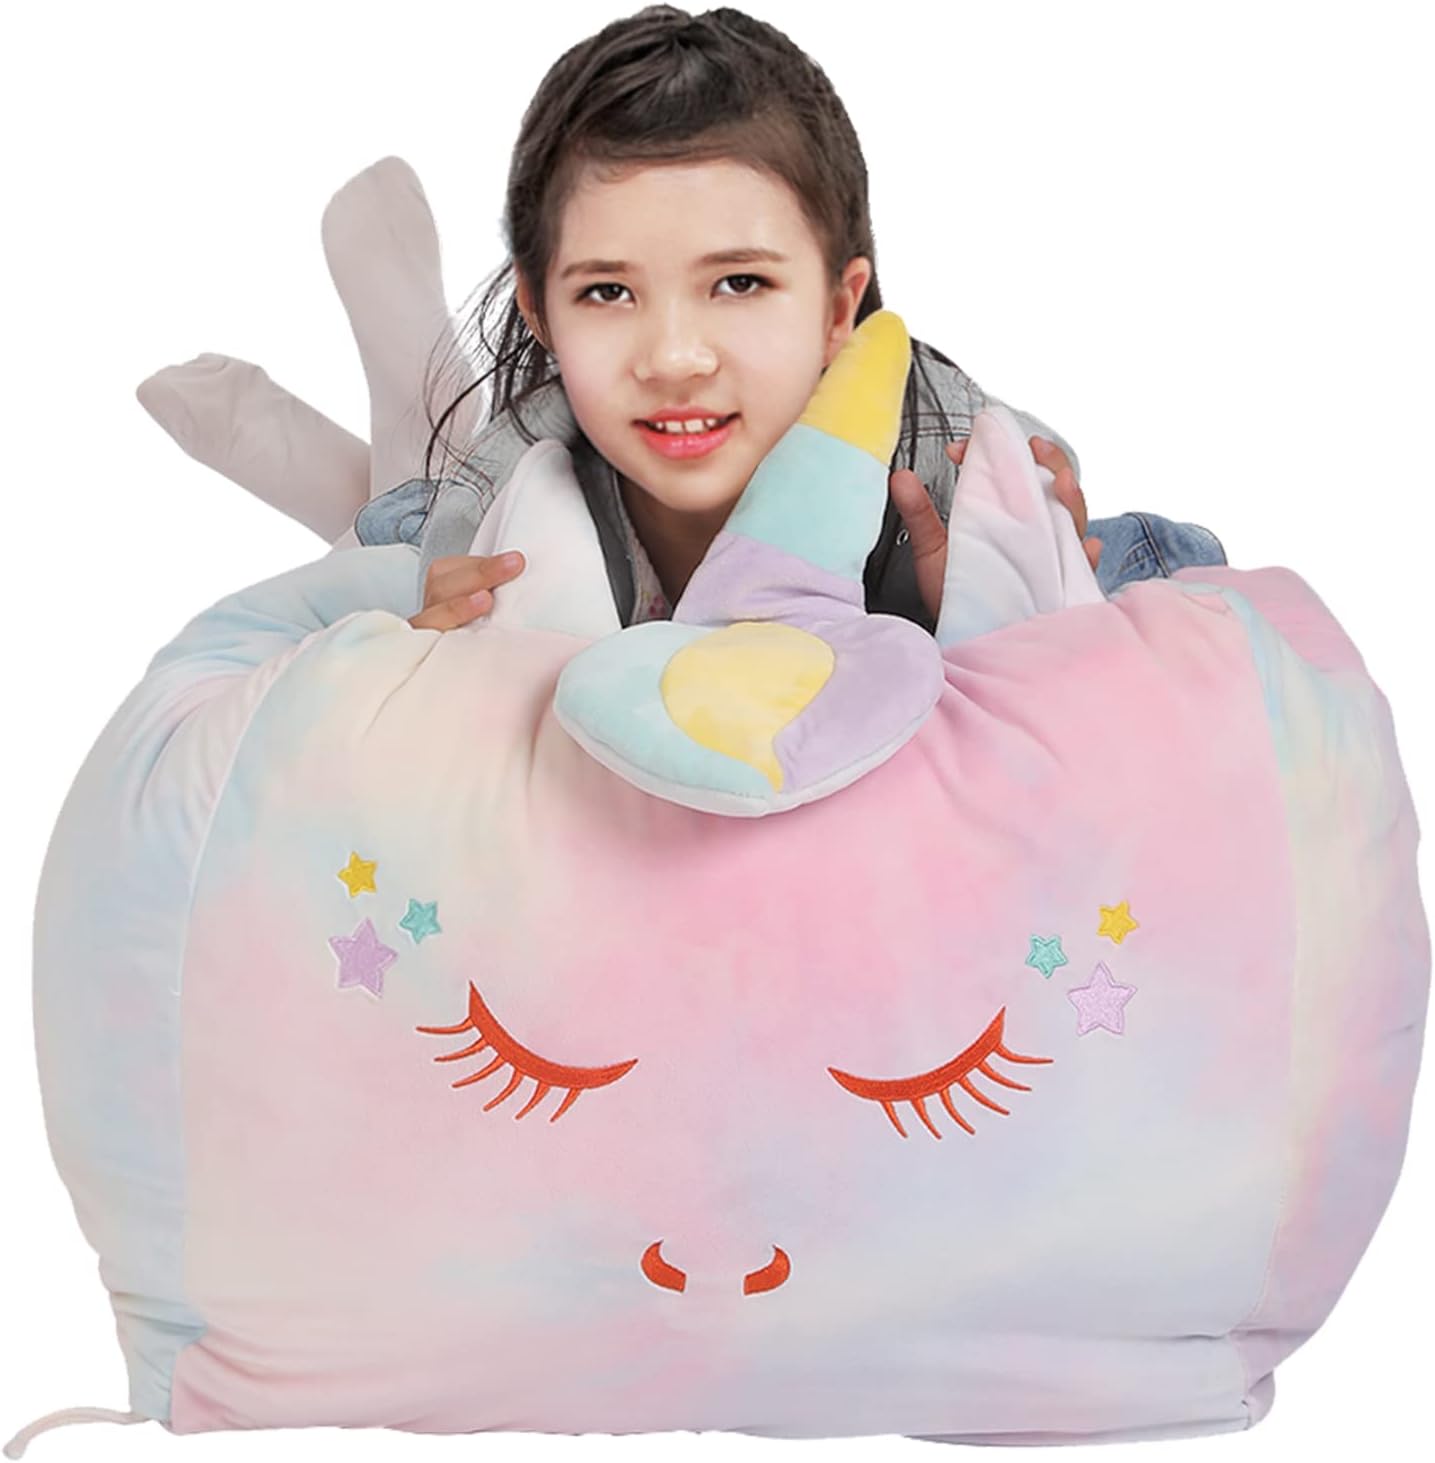 Yoweenton Unicorn Bean Bag Chair for Girls Room Decorations, Zipper Storage BeanBags for Organizing Stuffed Animals, Velvet Extra Soft Cover Only